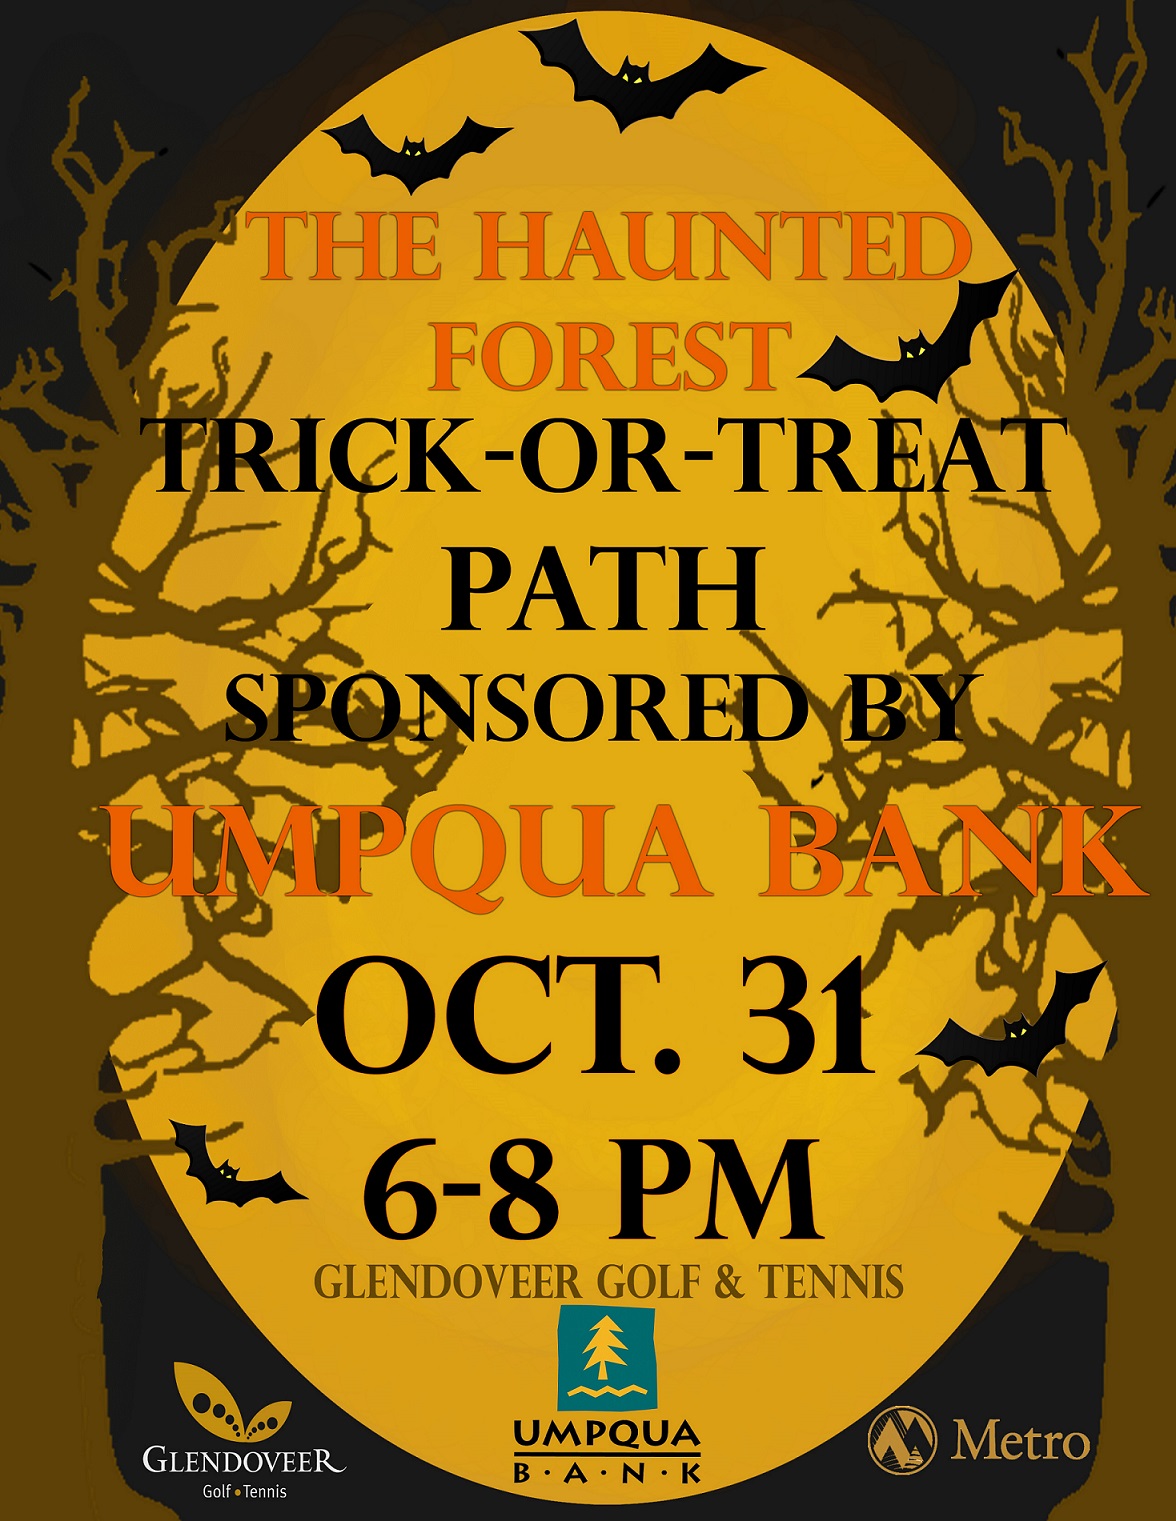 The Haunted Forest Sponsored by Umpqua Bank